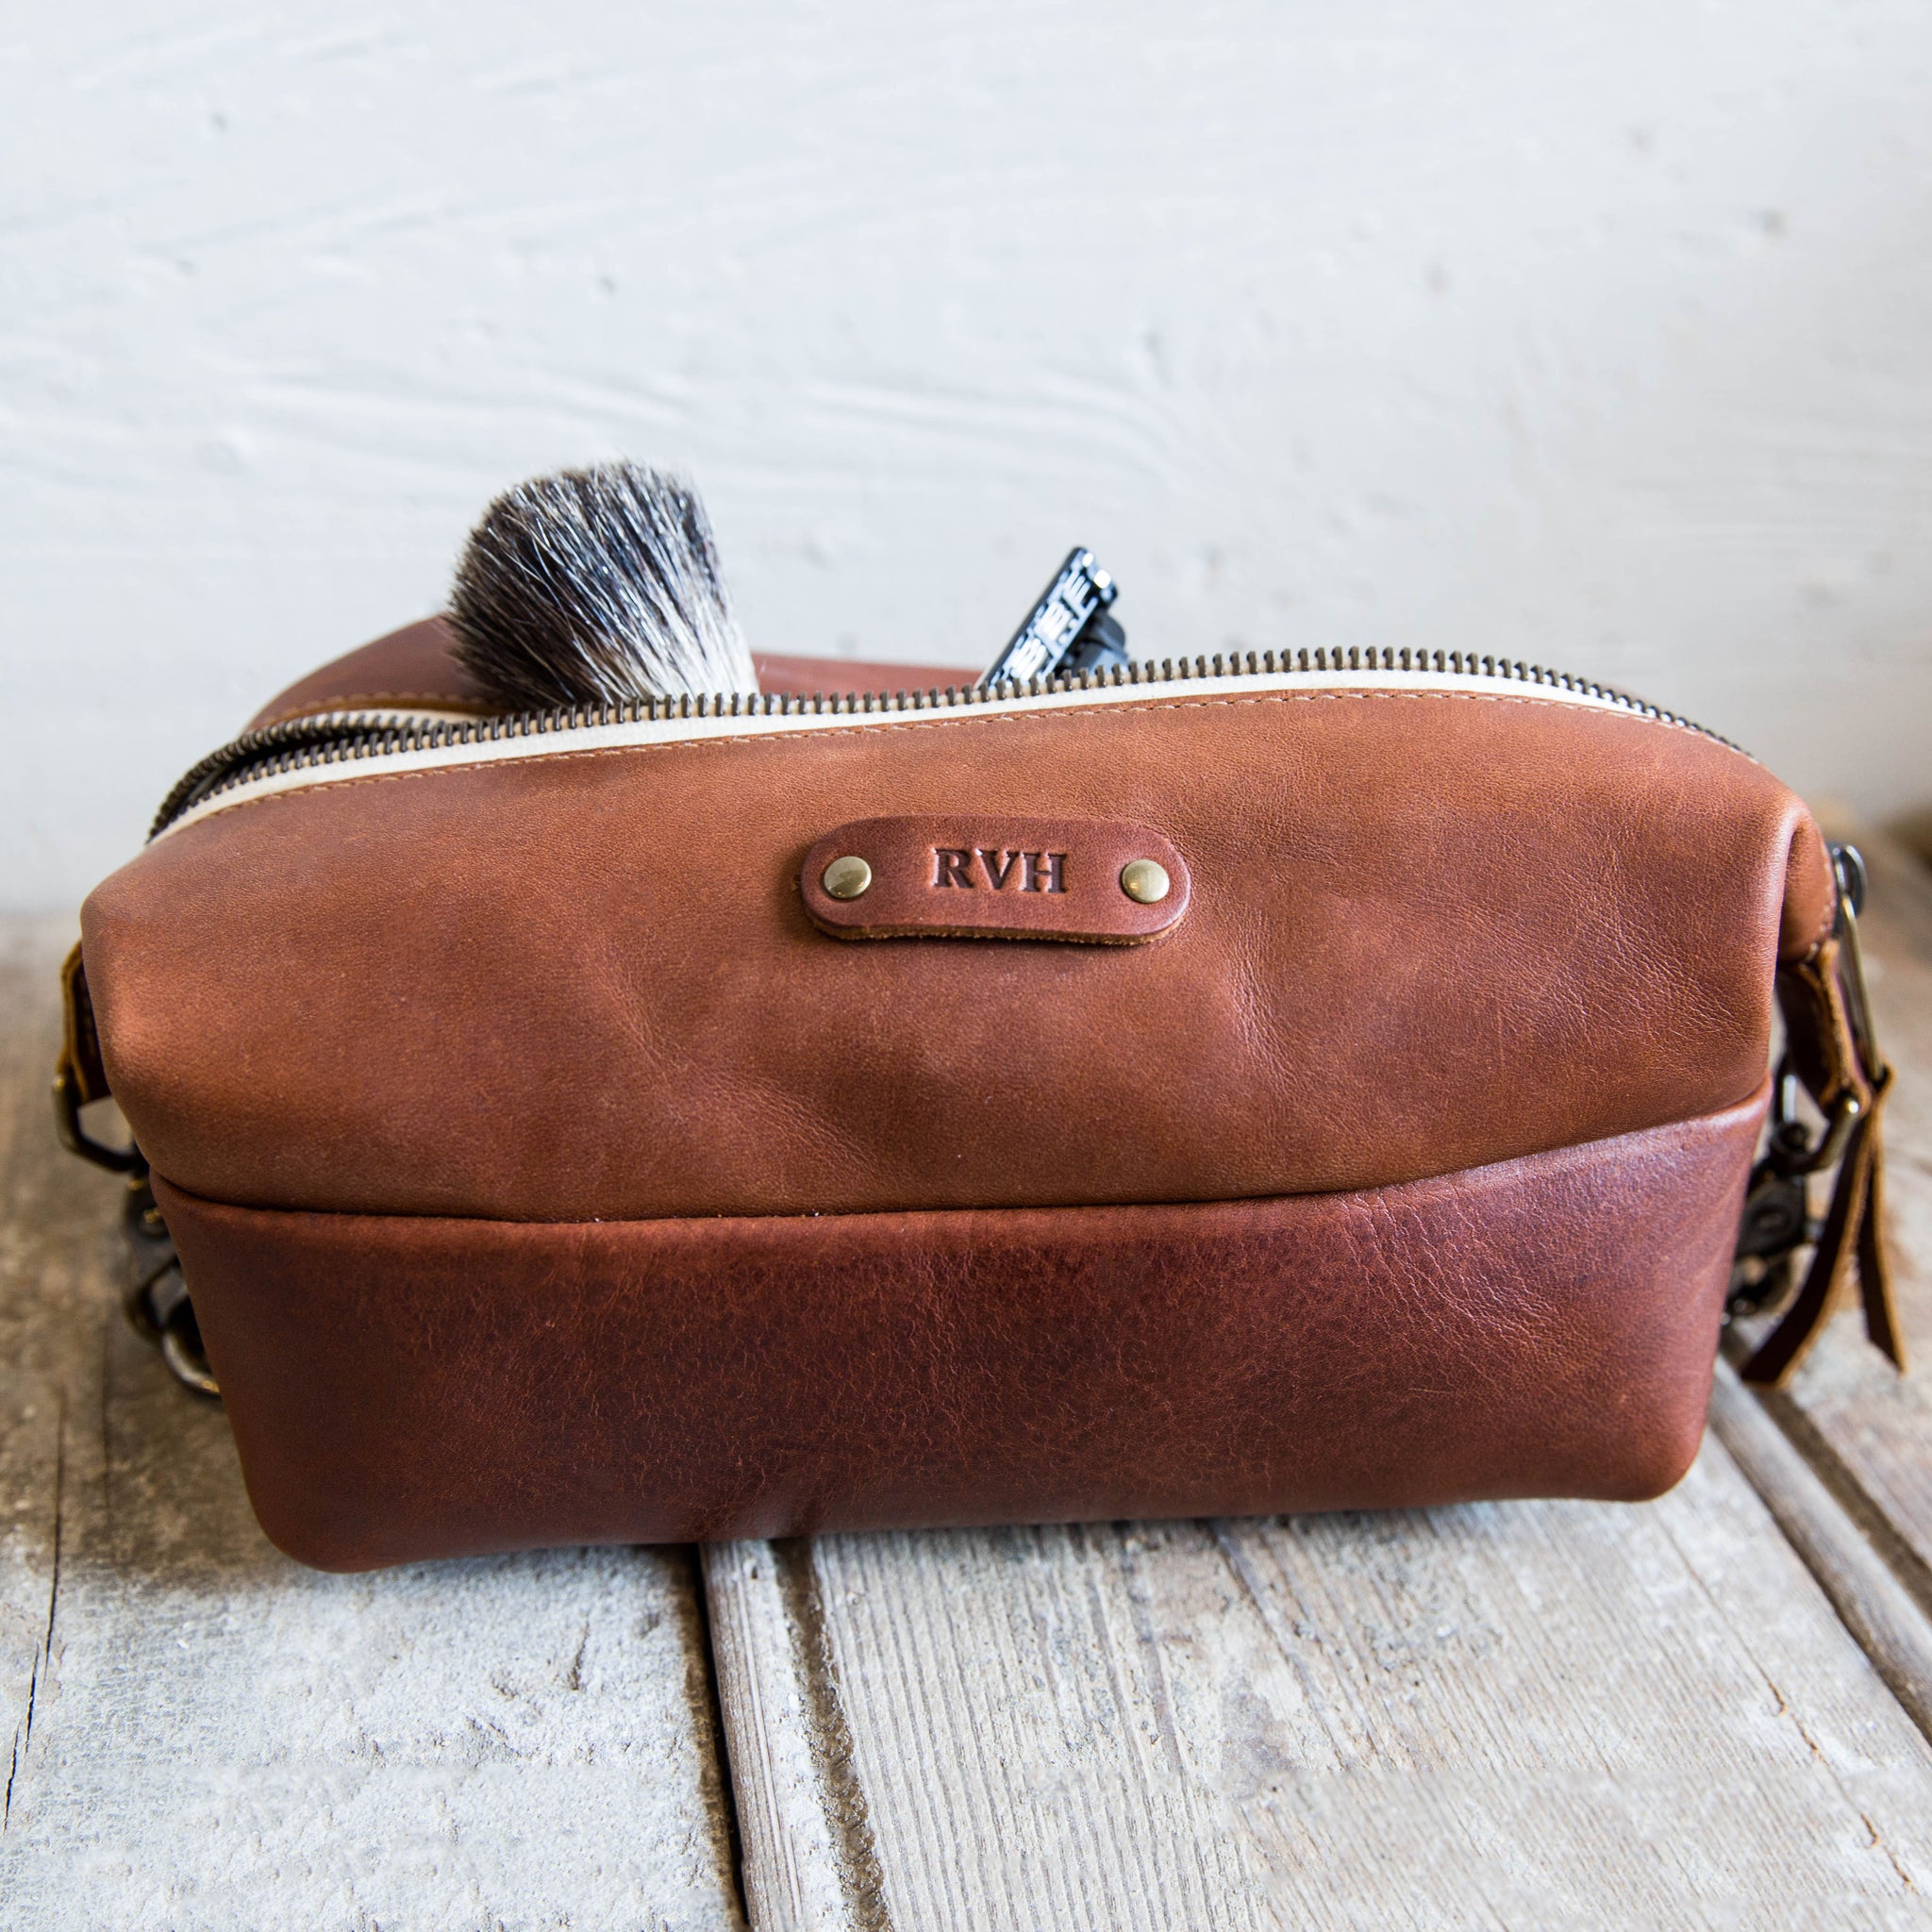 Personalized Leather Dopp Kit Bag - Fine Leather - Made in USA - Holtz ...